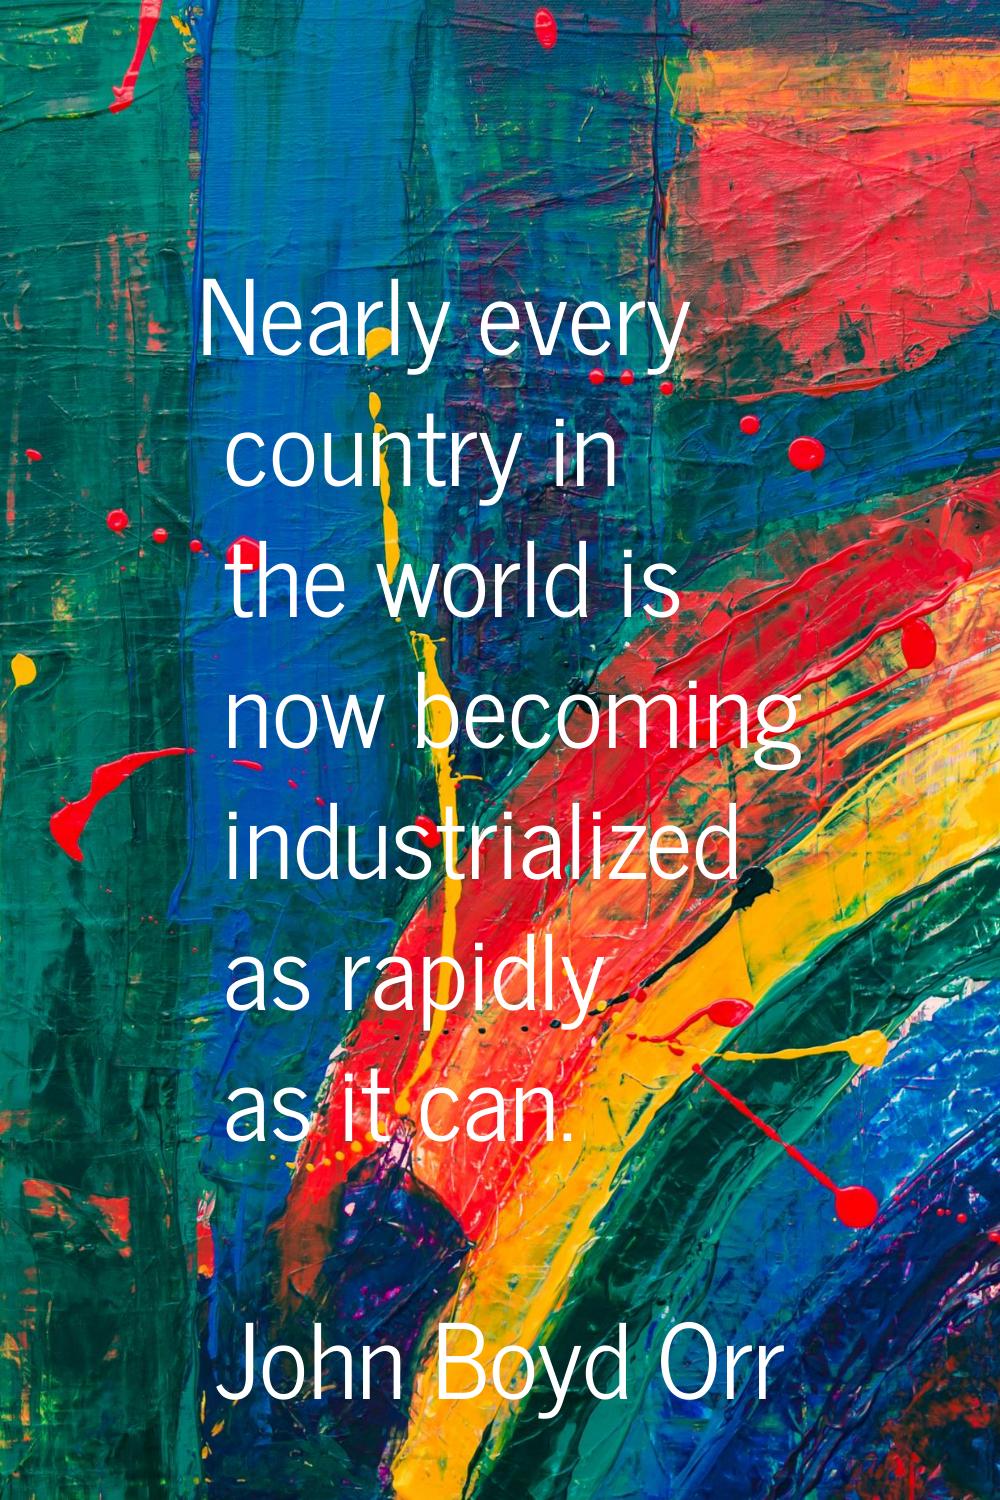 Nearly every country in the world is now becoming industrialized as rapidly as it can.